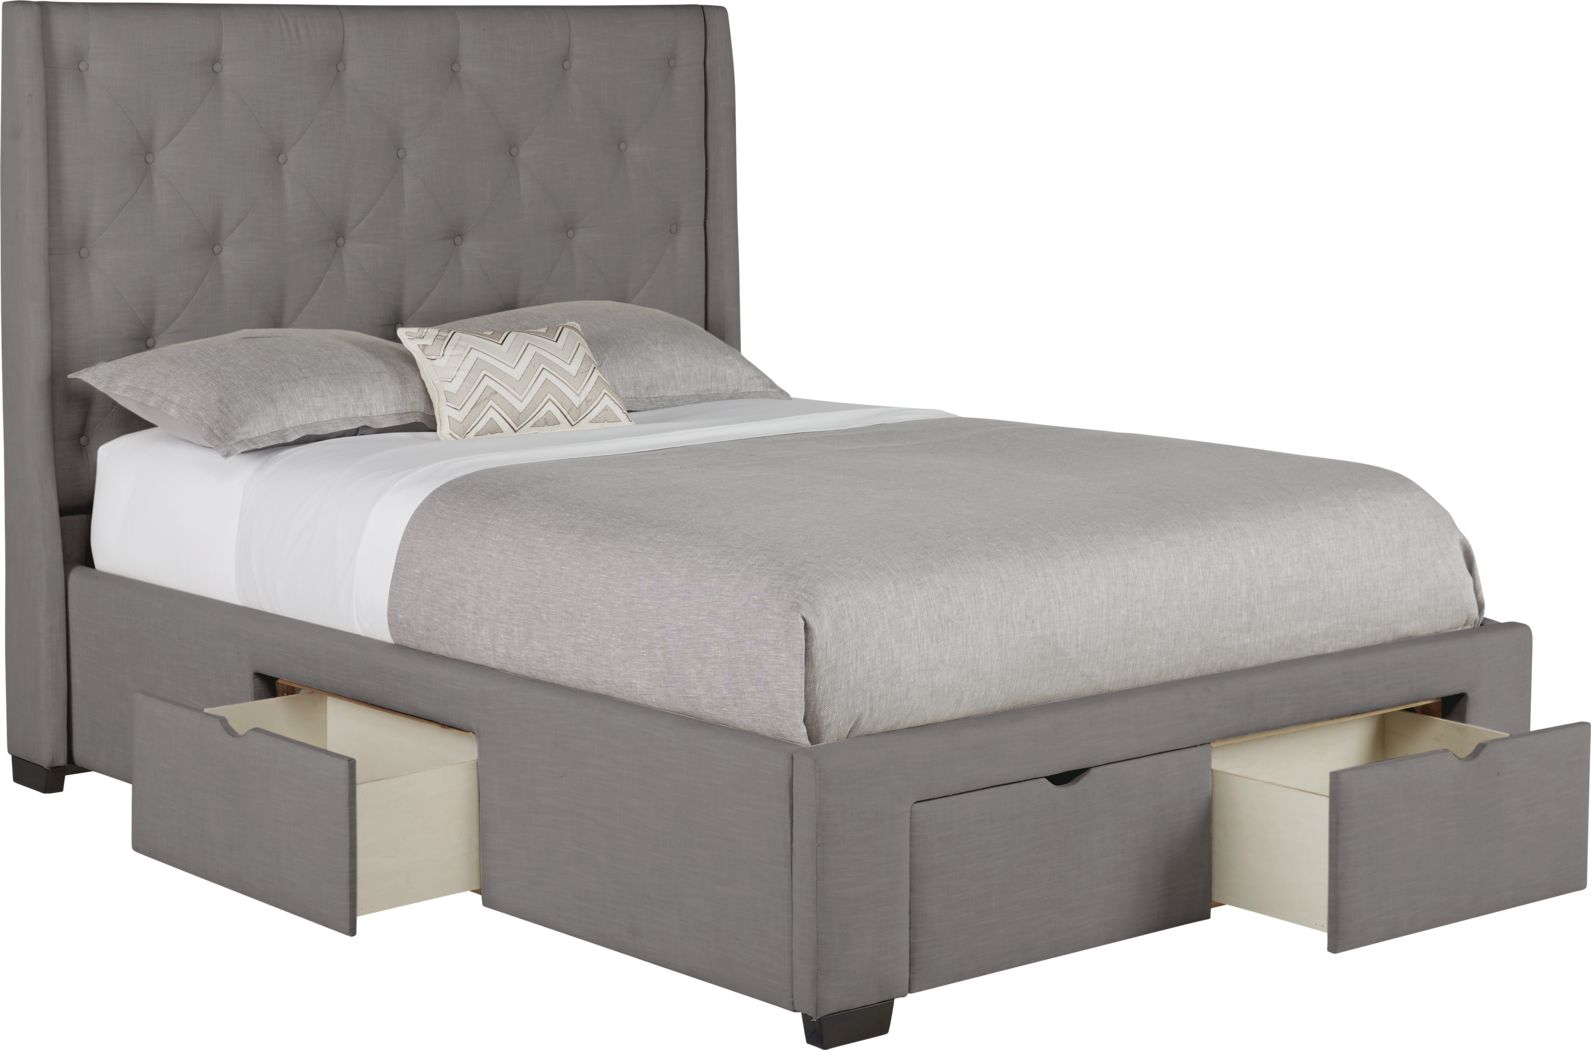 Storage King Size Beds Frames, King Size Bed With Storage Drawers Underneath